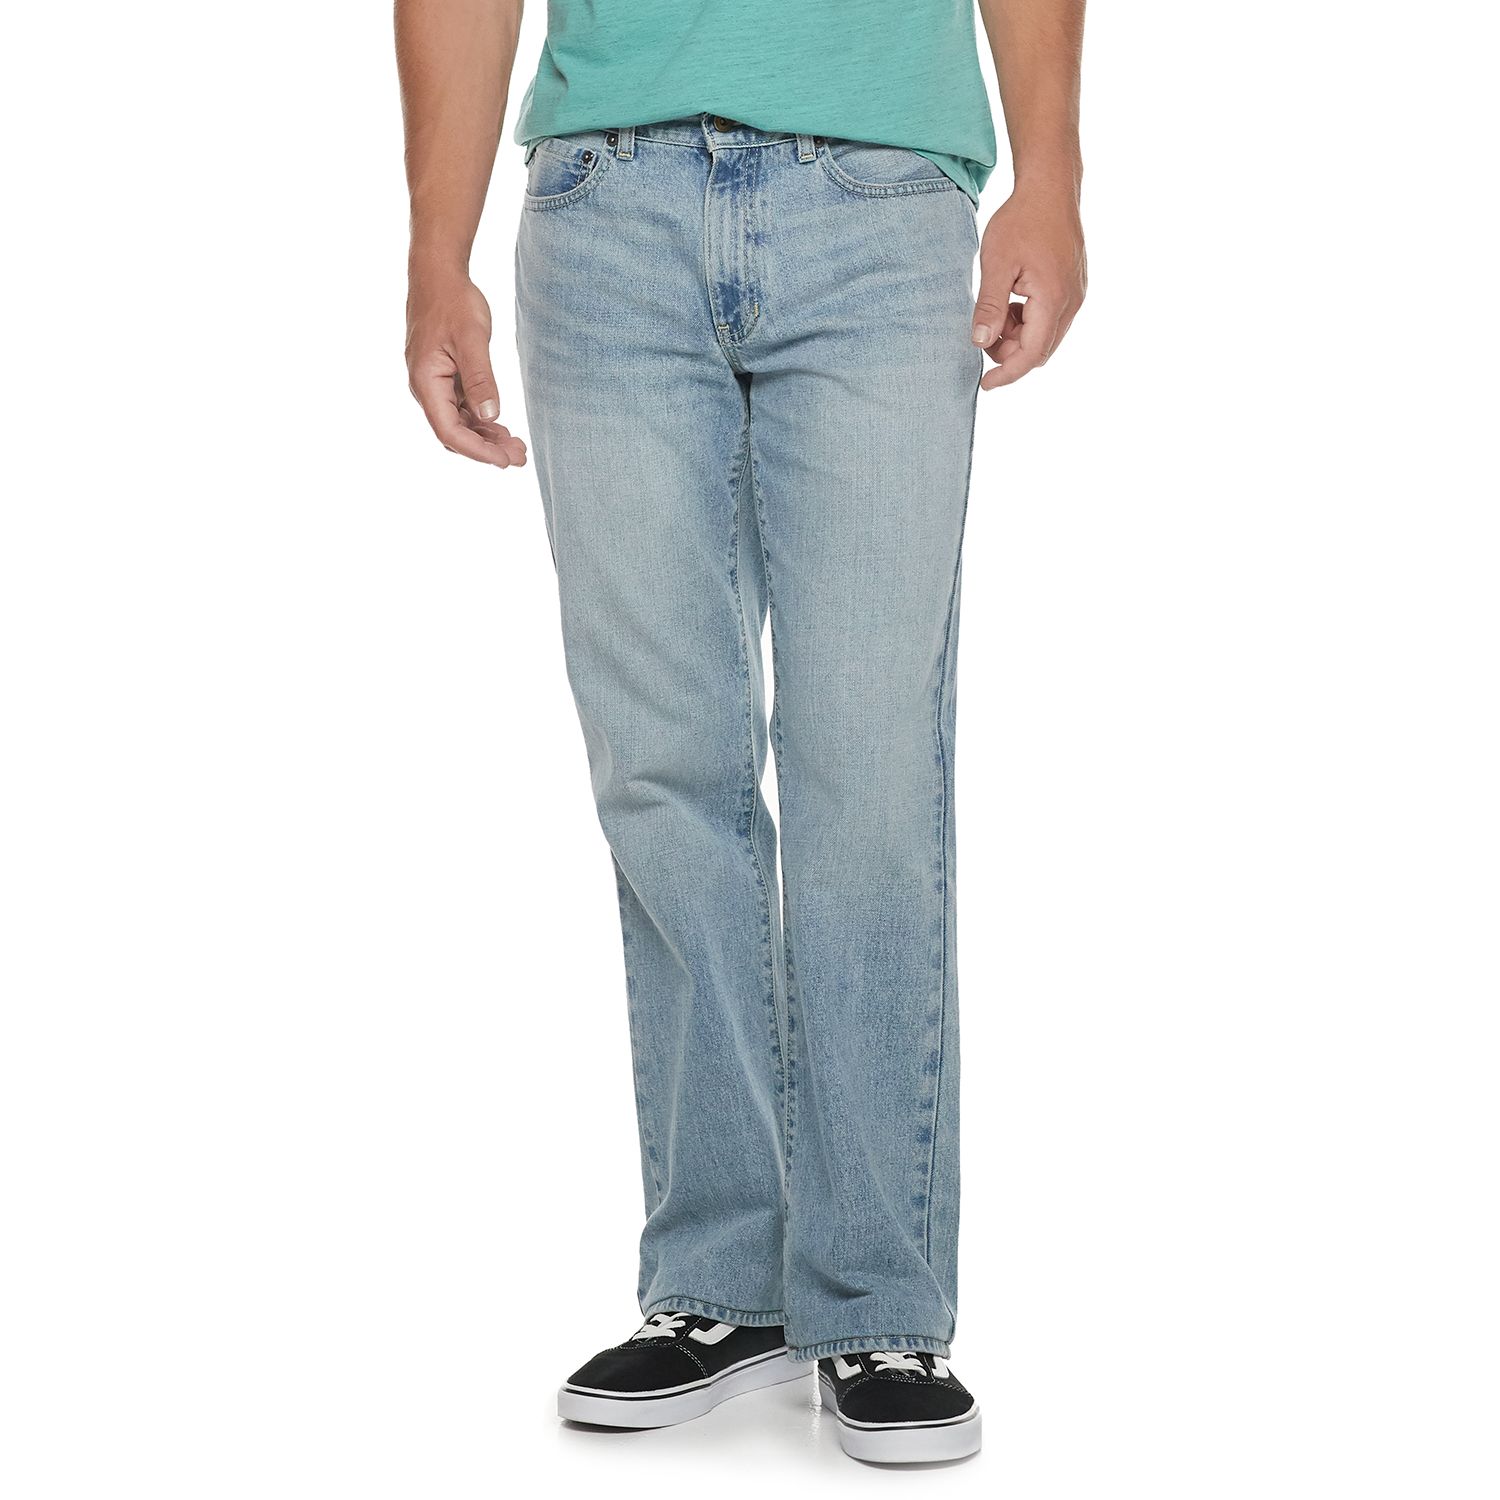 urban pipeline relaxed bootcut